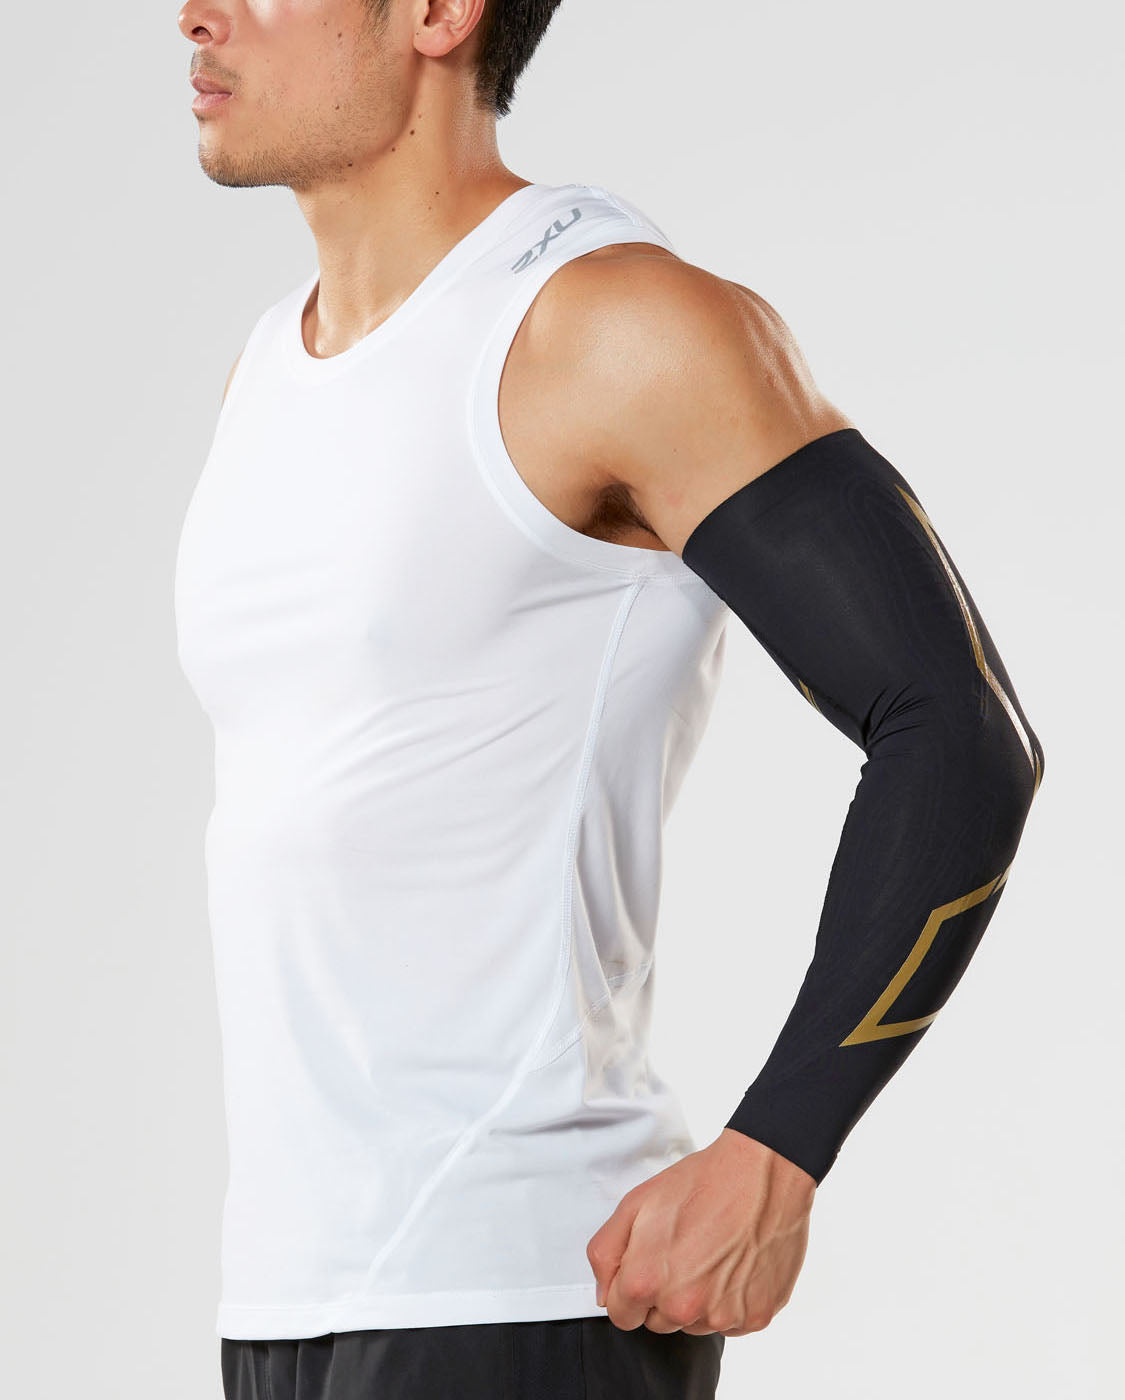 2XU FORCE COMPRESSION ARM GUARDS